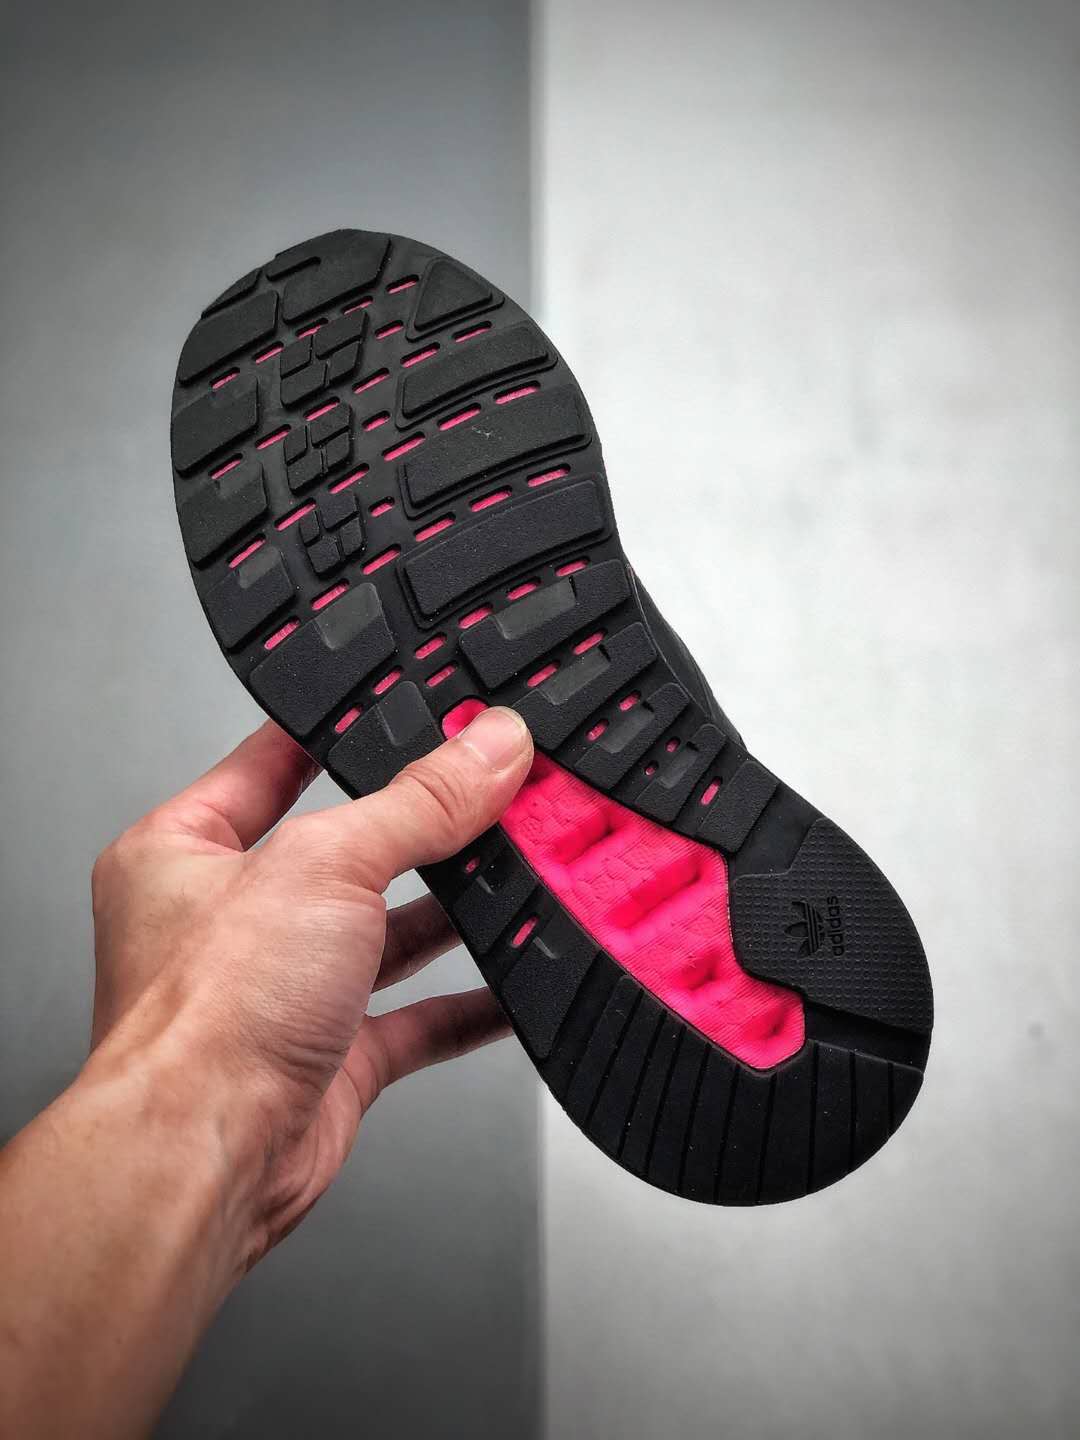 Adidas ZX 2K Boost 'Black Shock Pink' FV8986 - Lightweight and Stylish Footwear for Ultimate Comfort